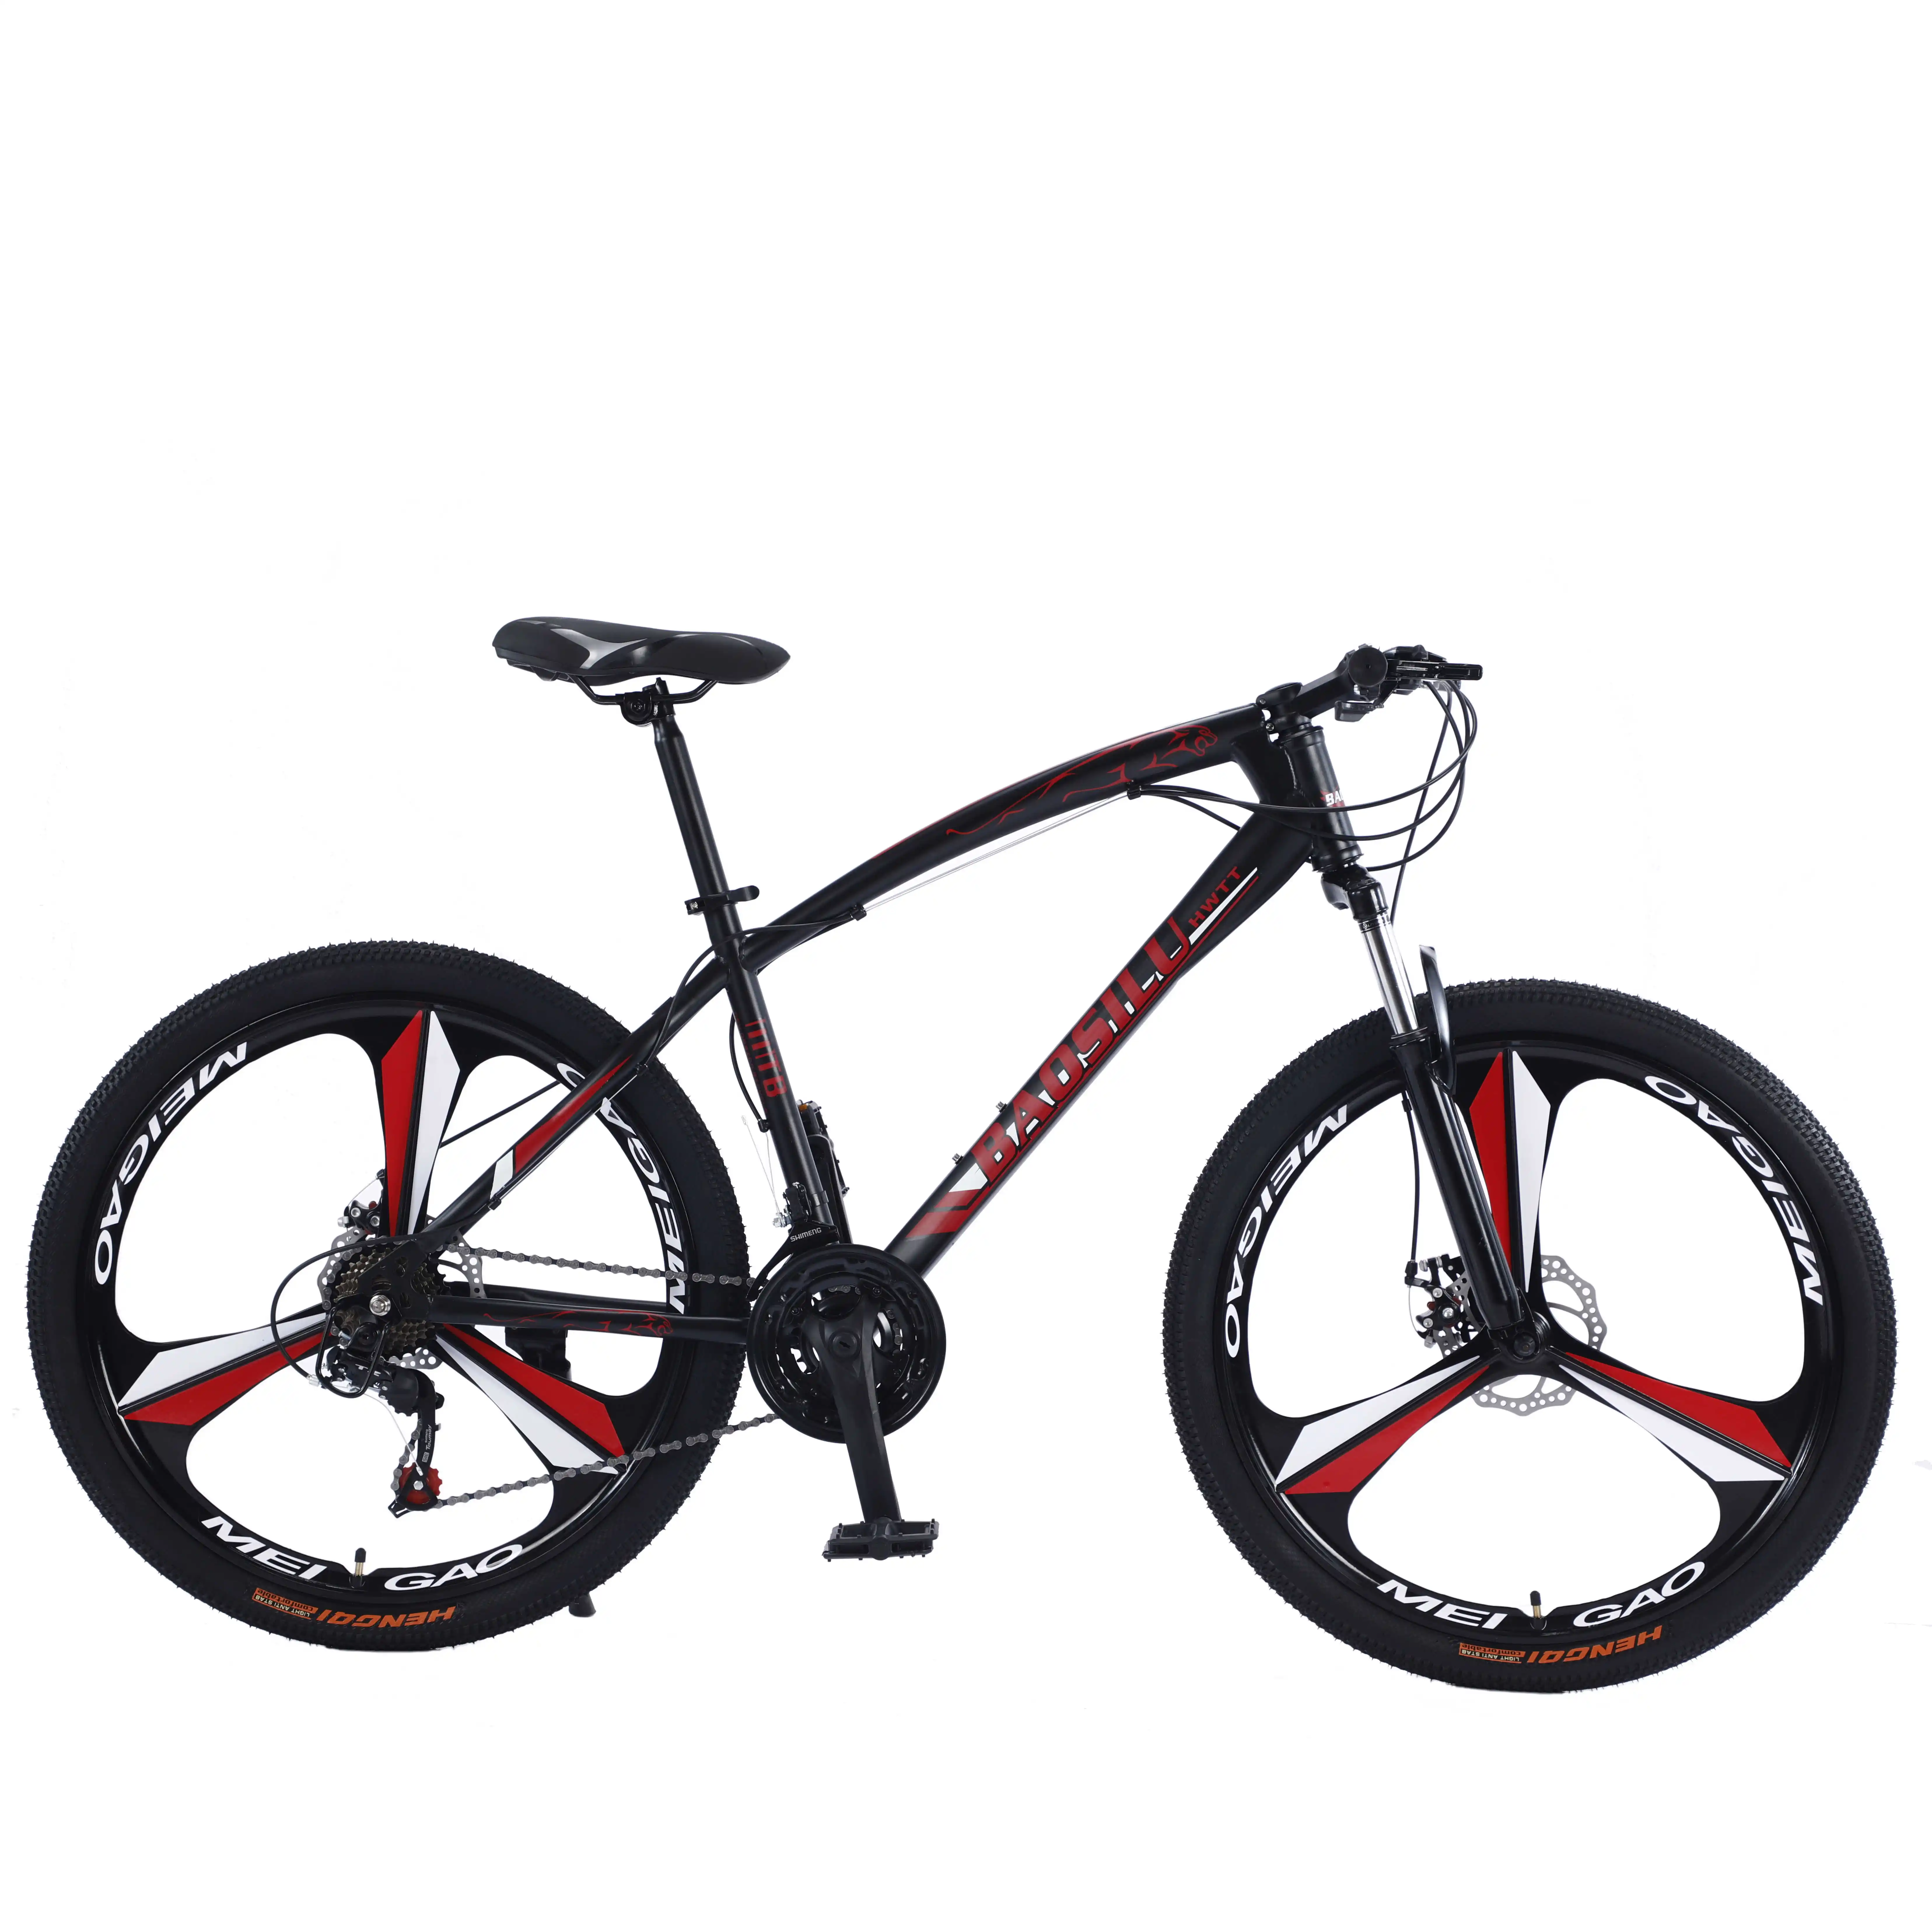 Men's 24 Inch Downhill Mountain Bike Folding MTB with Carbon Steel Aluminum Alloy Frame and Disc Brake System